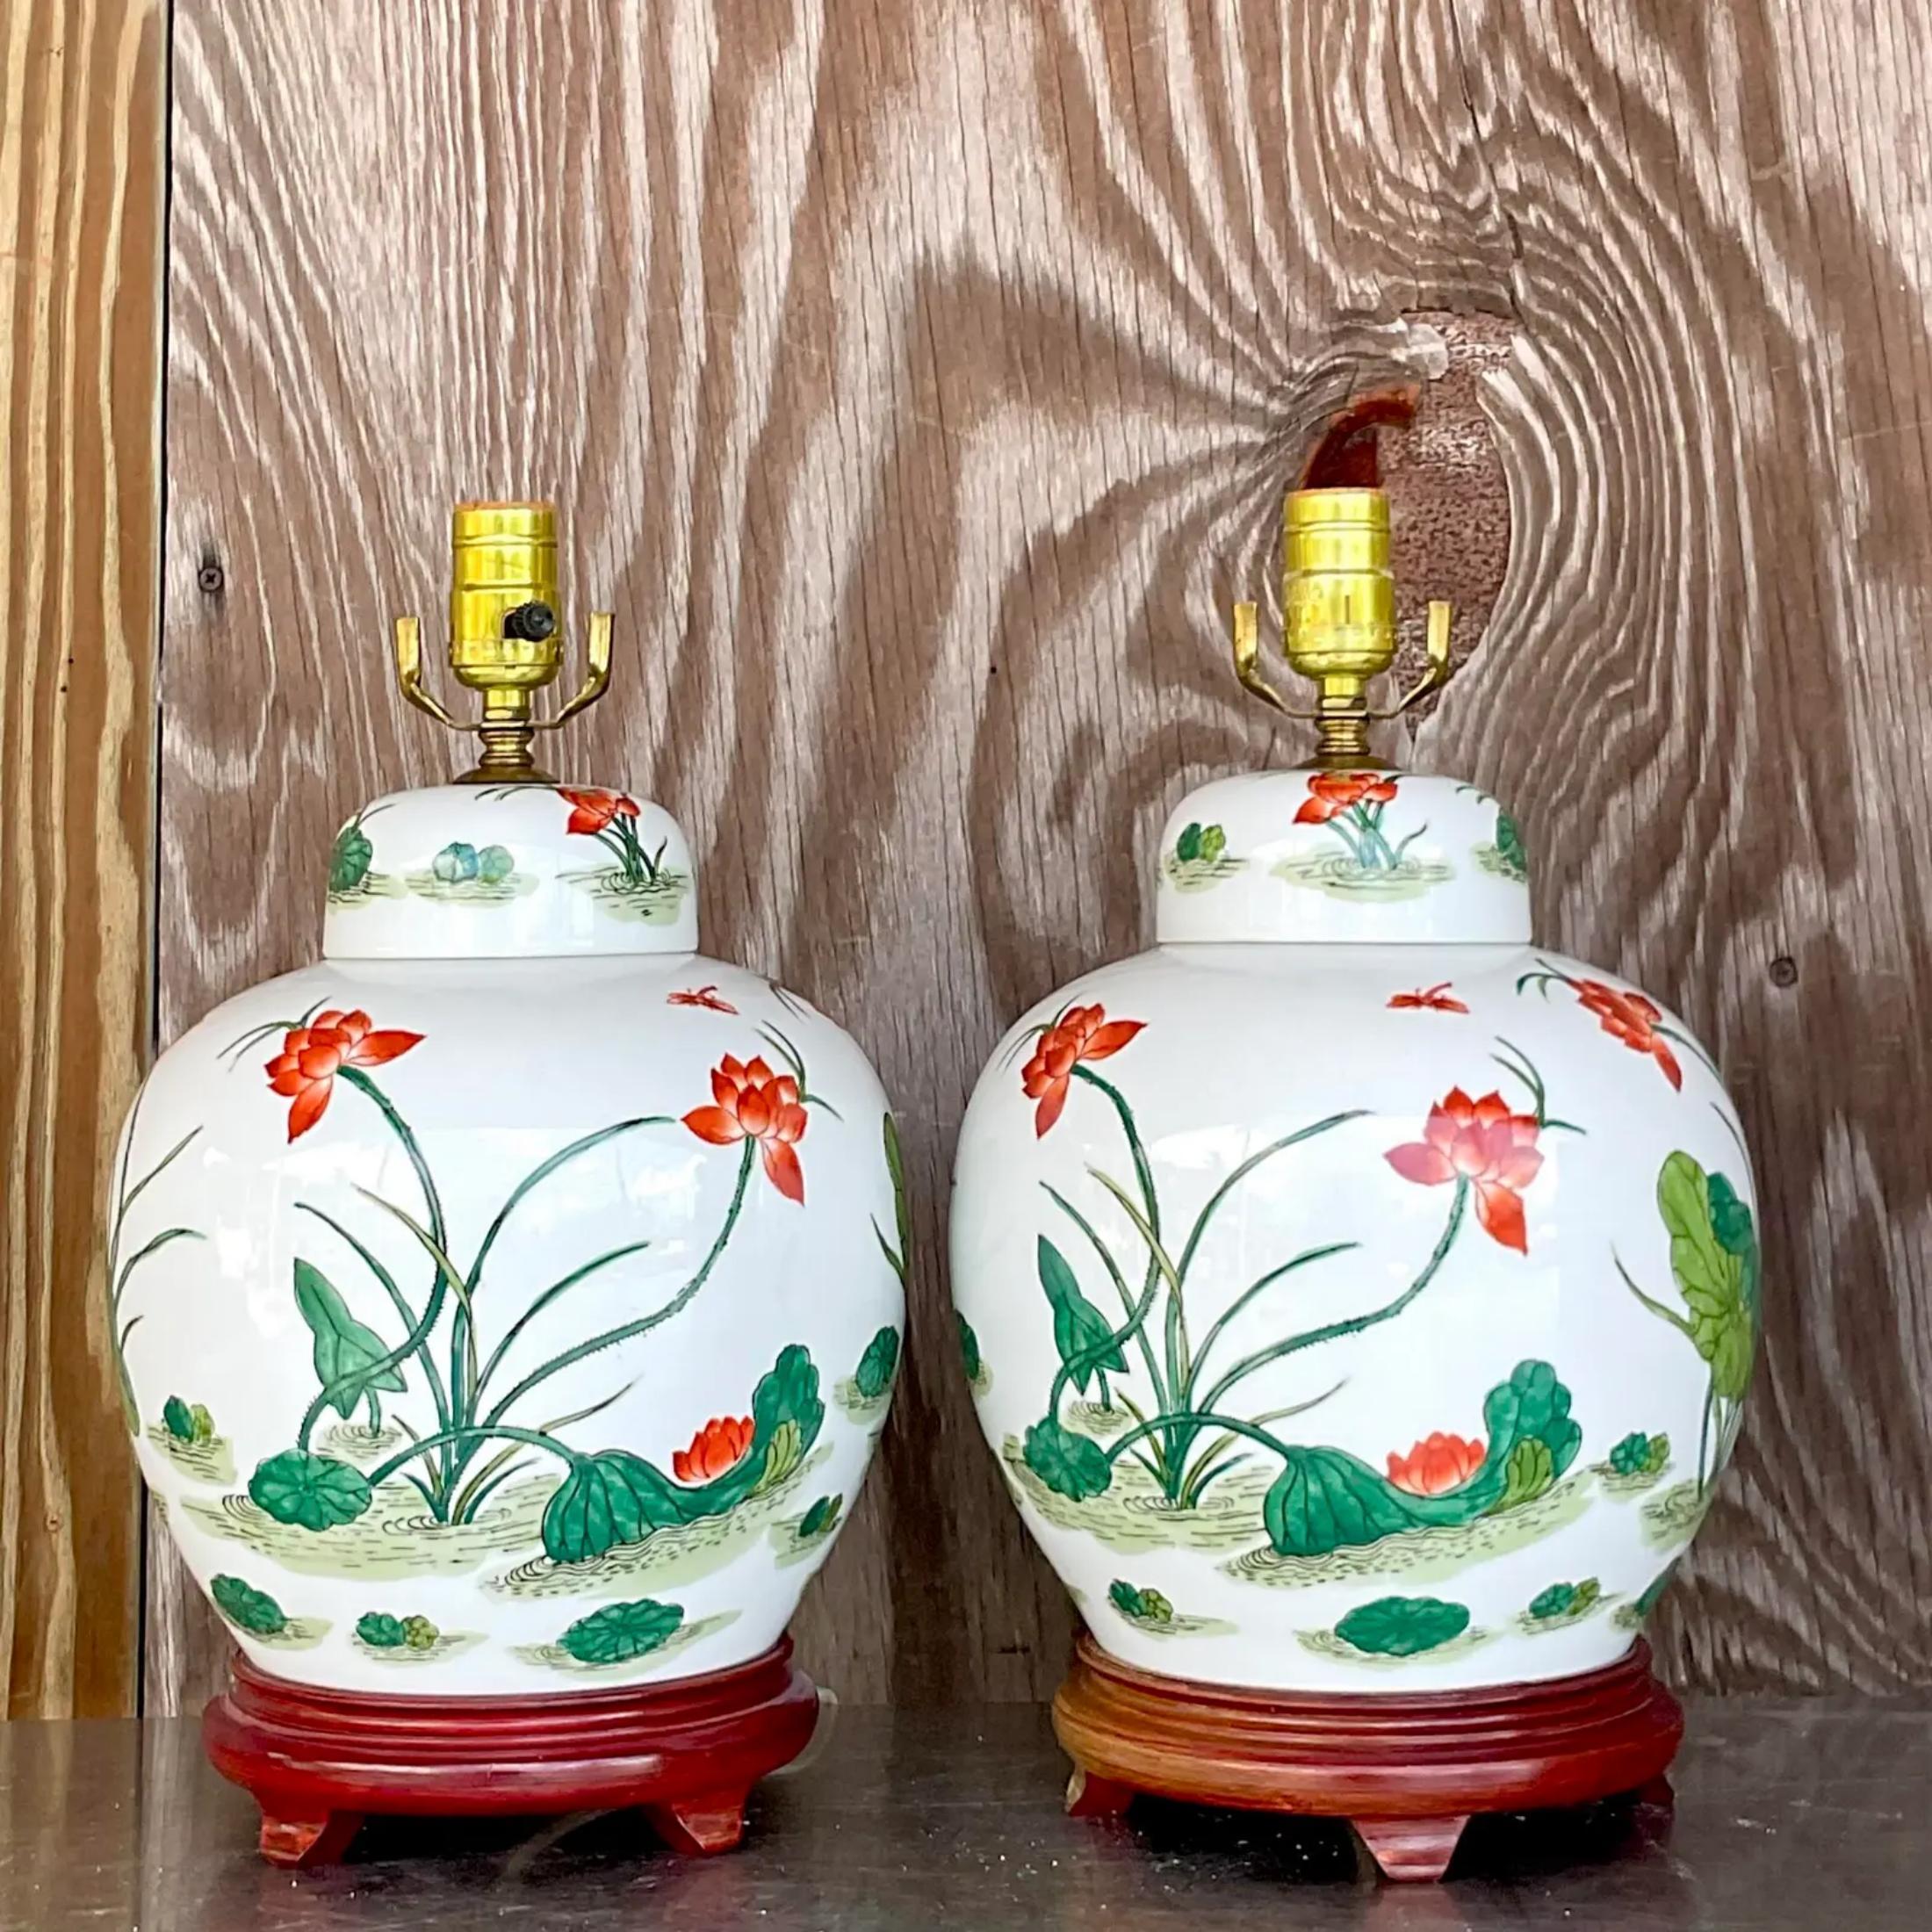 Vintage Asian Glazed Ceramic Ginger Jar Lamps - a Pair In Good Condition For Sale In west palm beach, FL